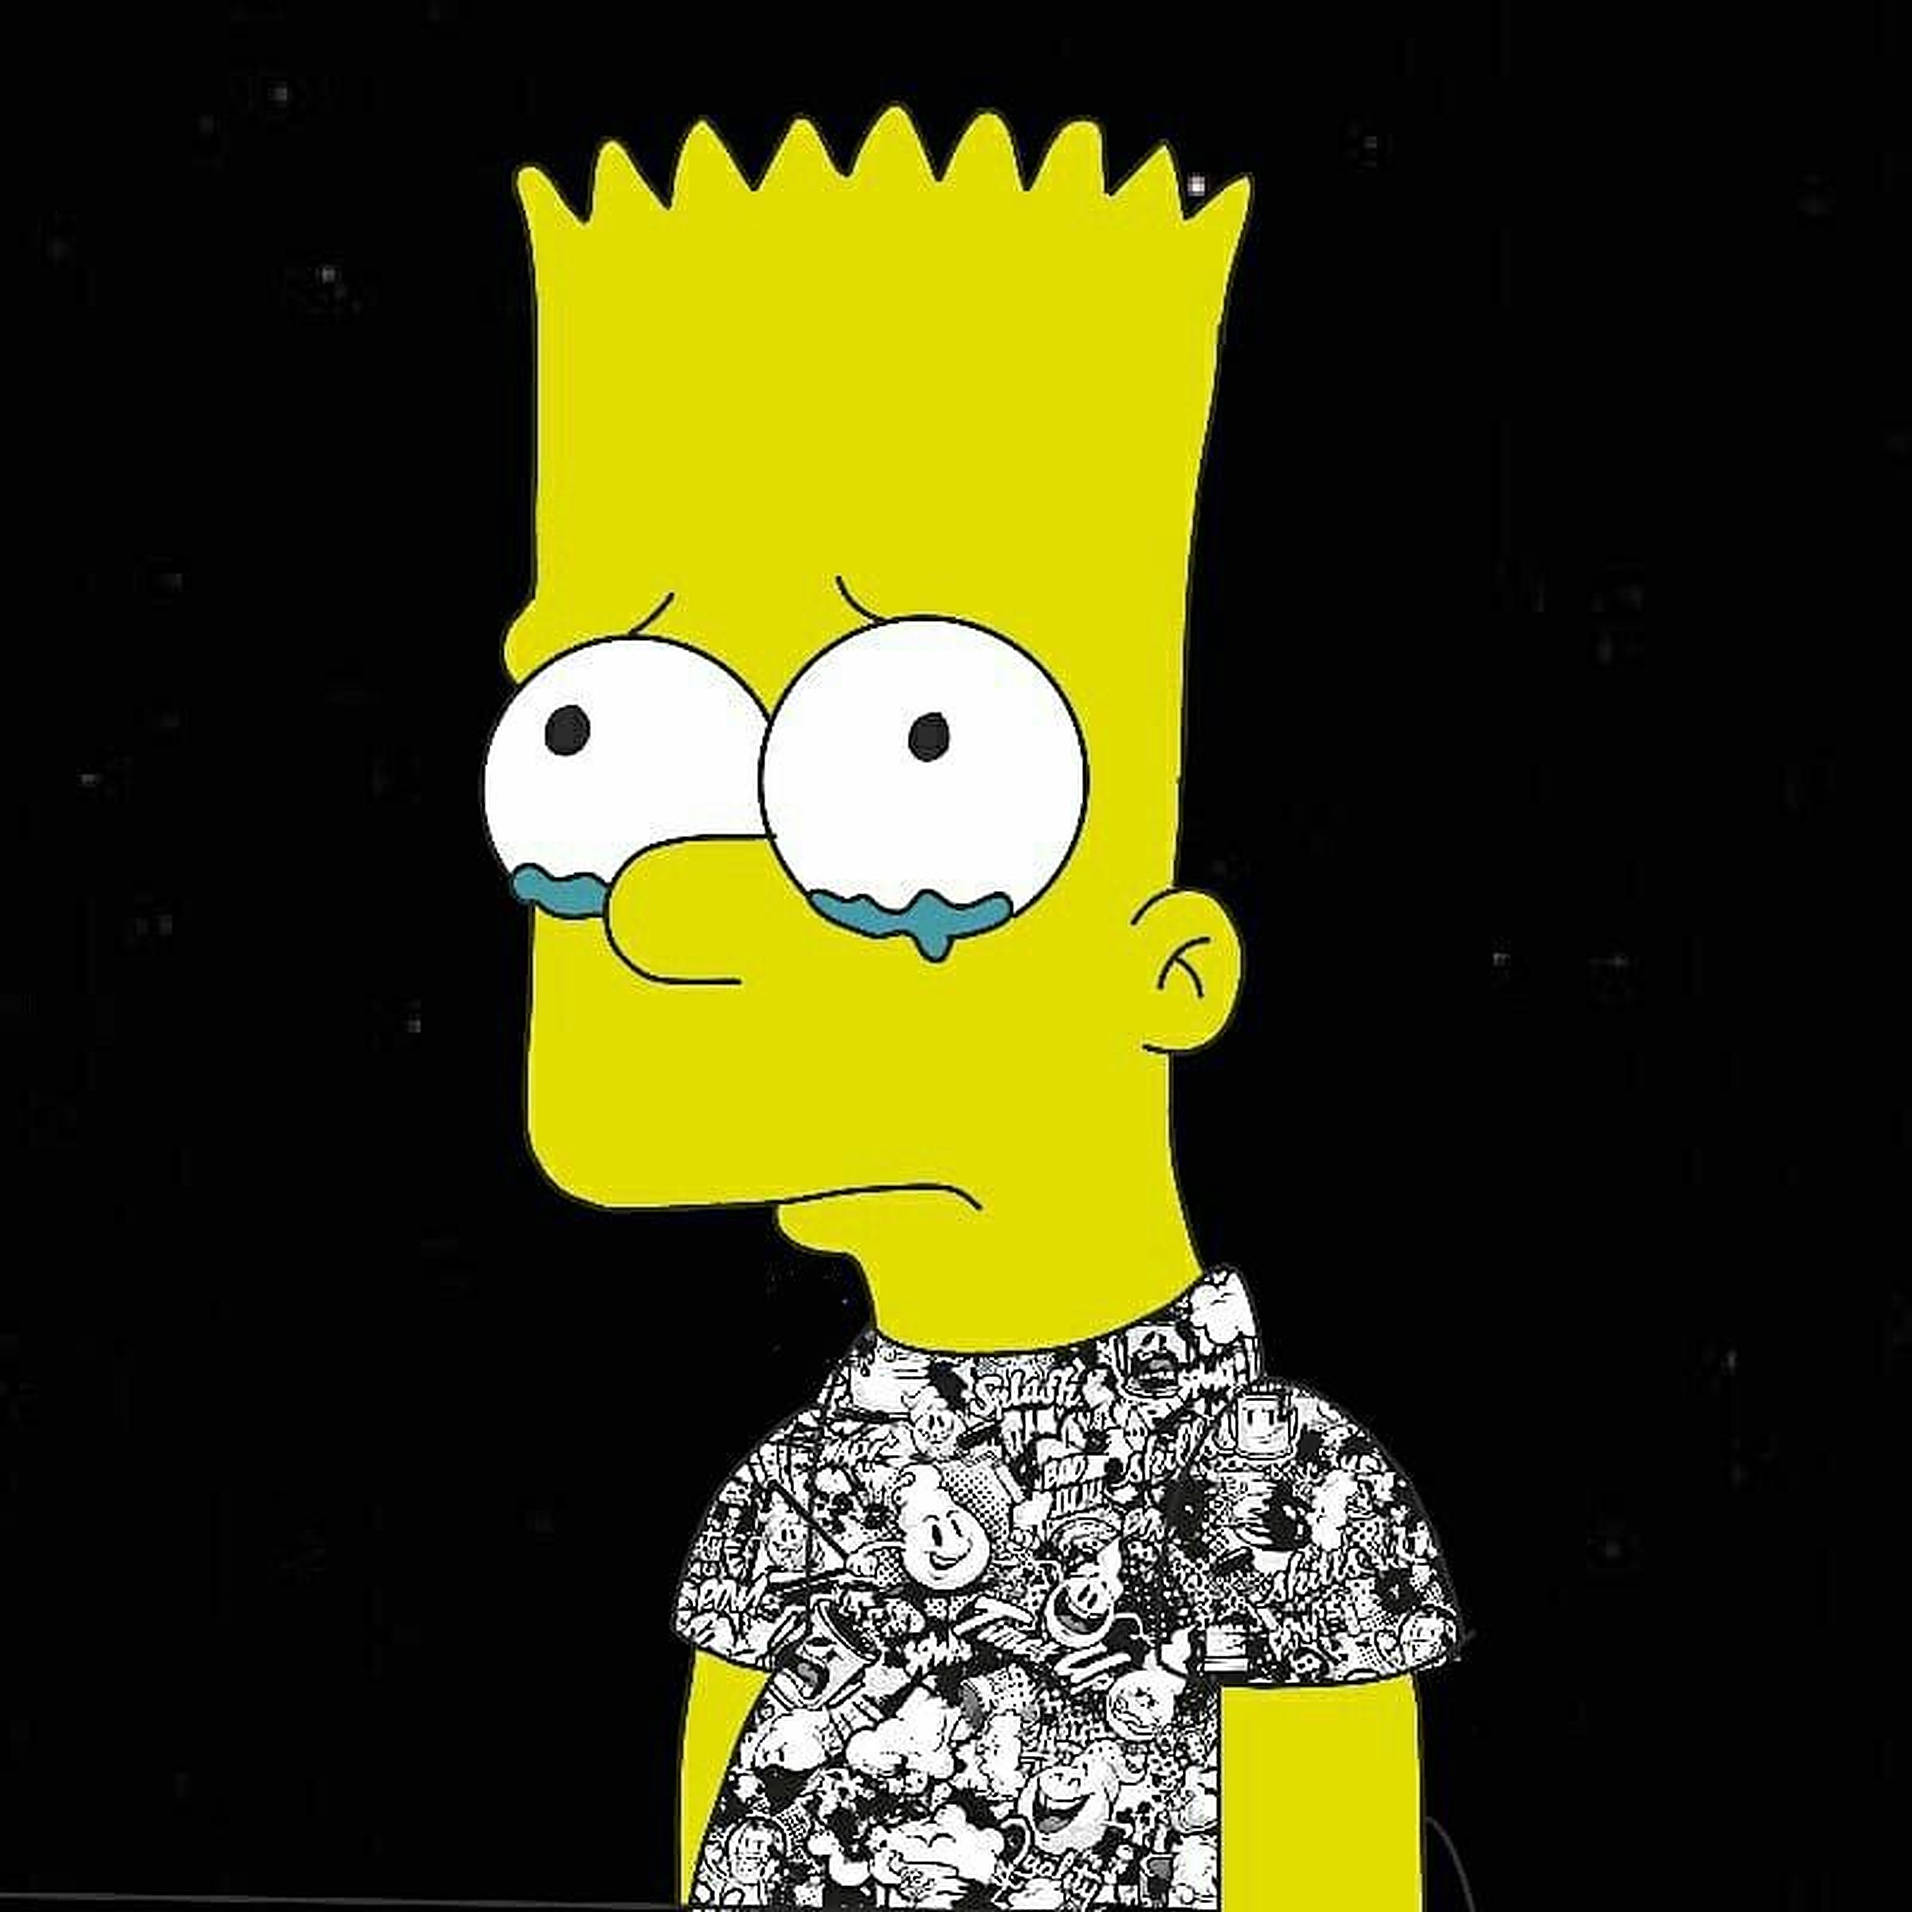 Sad Bart Simpsons With Teary Eyes Wallpaper